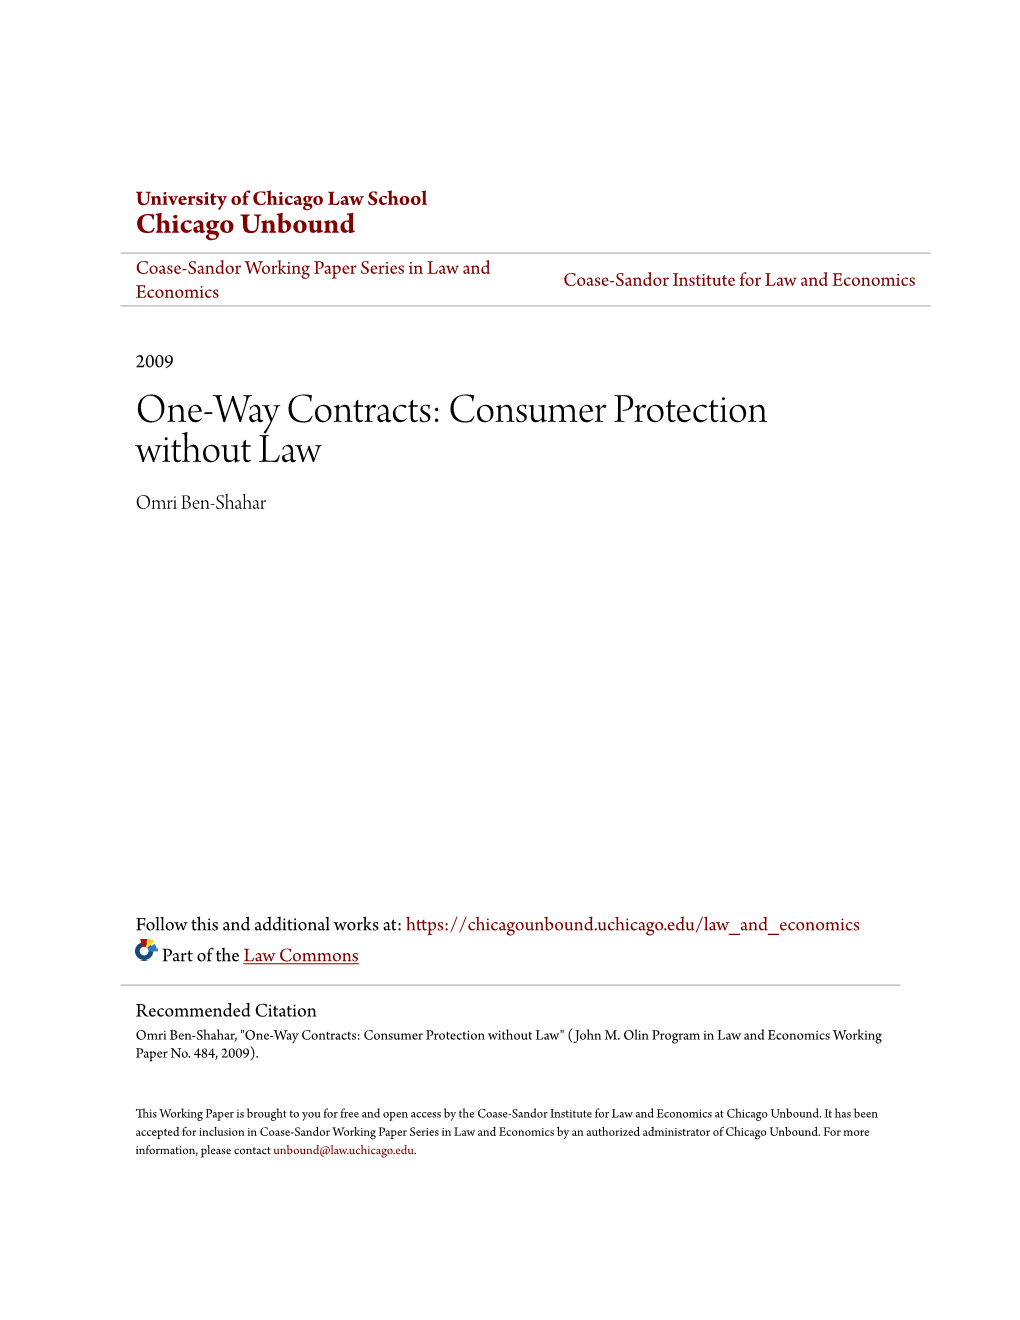 One-Way Contracts: Consumer Protection Without Law Omri Ben-Shahar